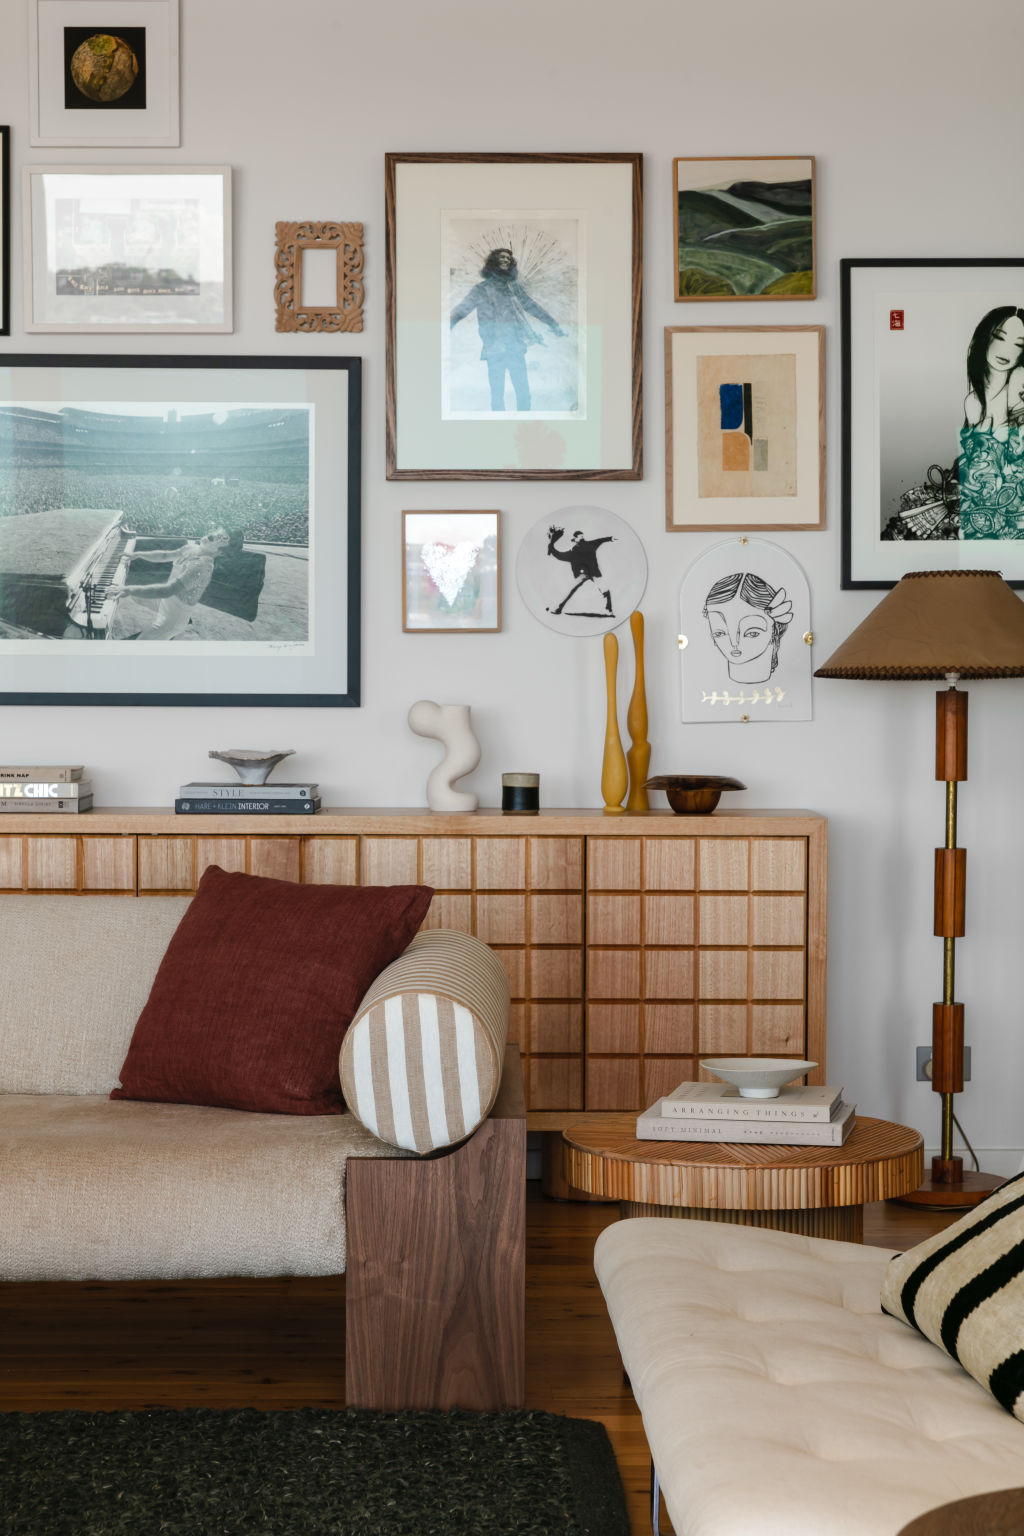 Creativity flourishes throughout the home: the walnut sofa and Tasmanian oak sideboard in the living room were designed by Jones herself. Photo: Trudy Pagden